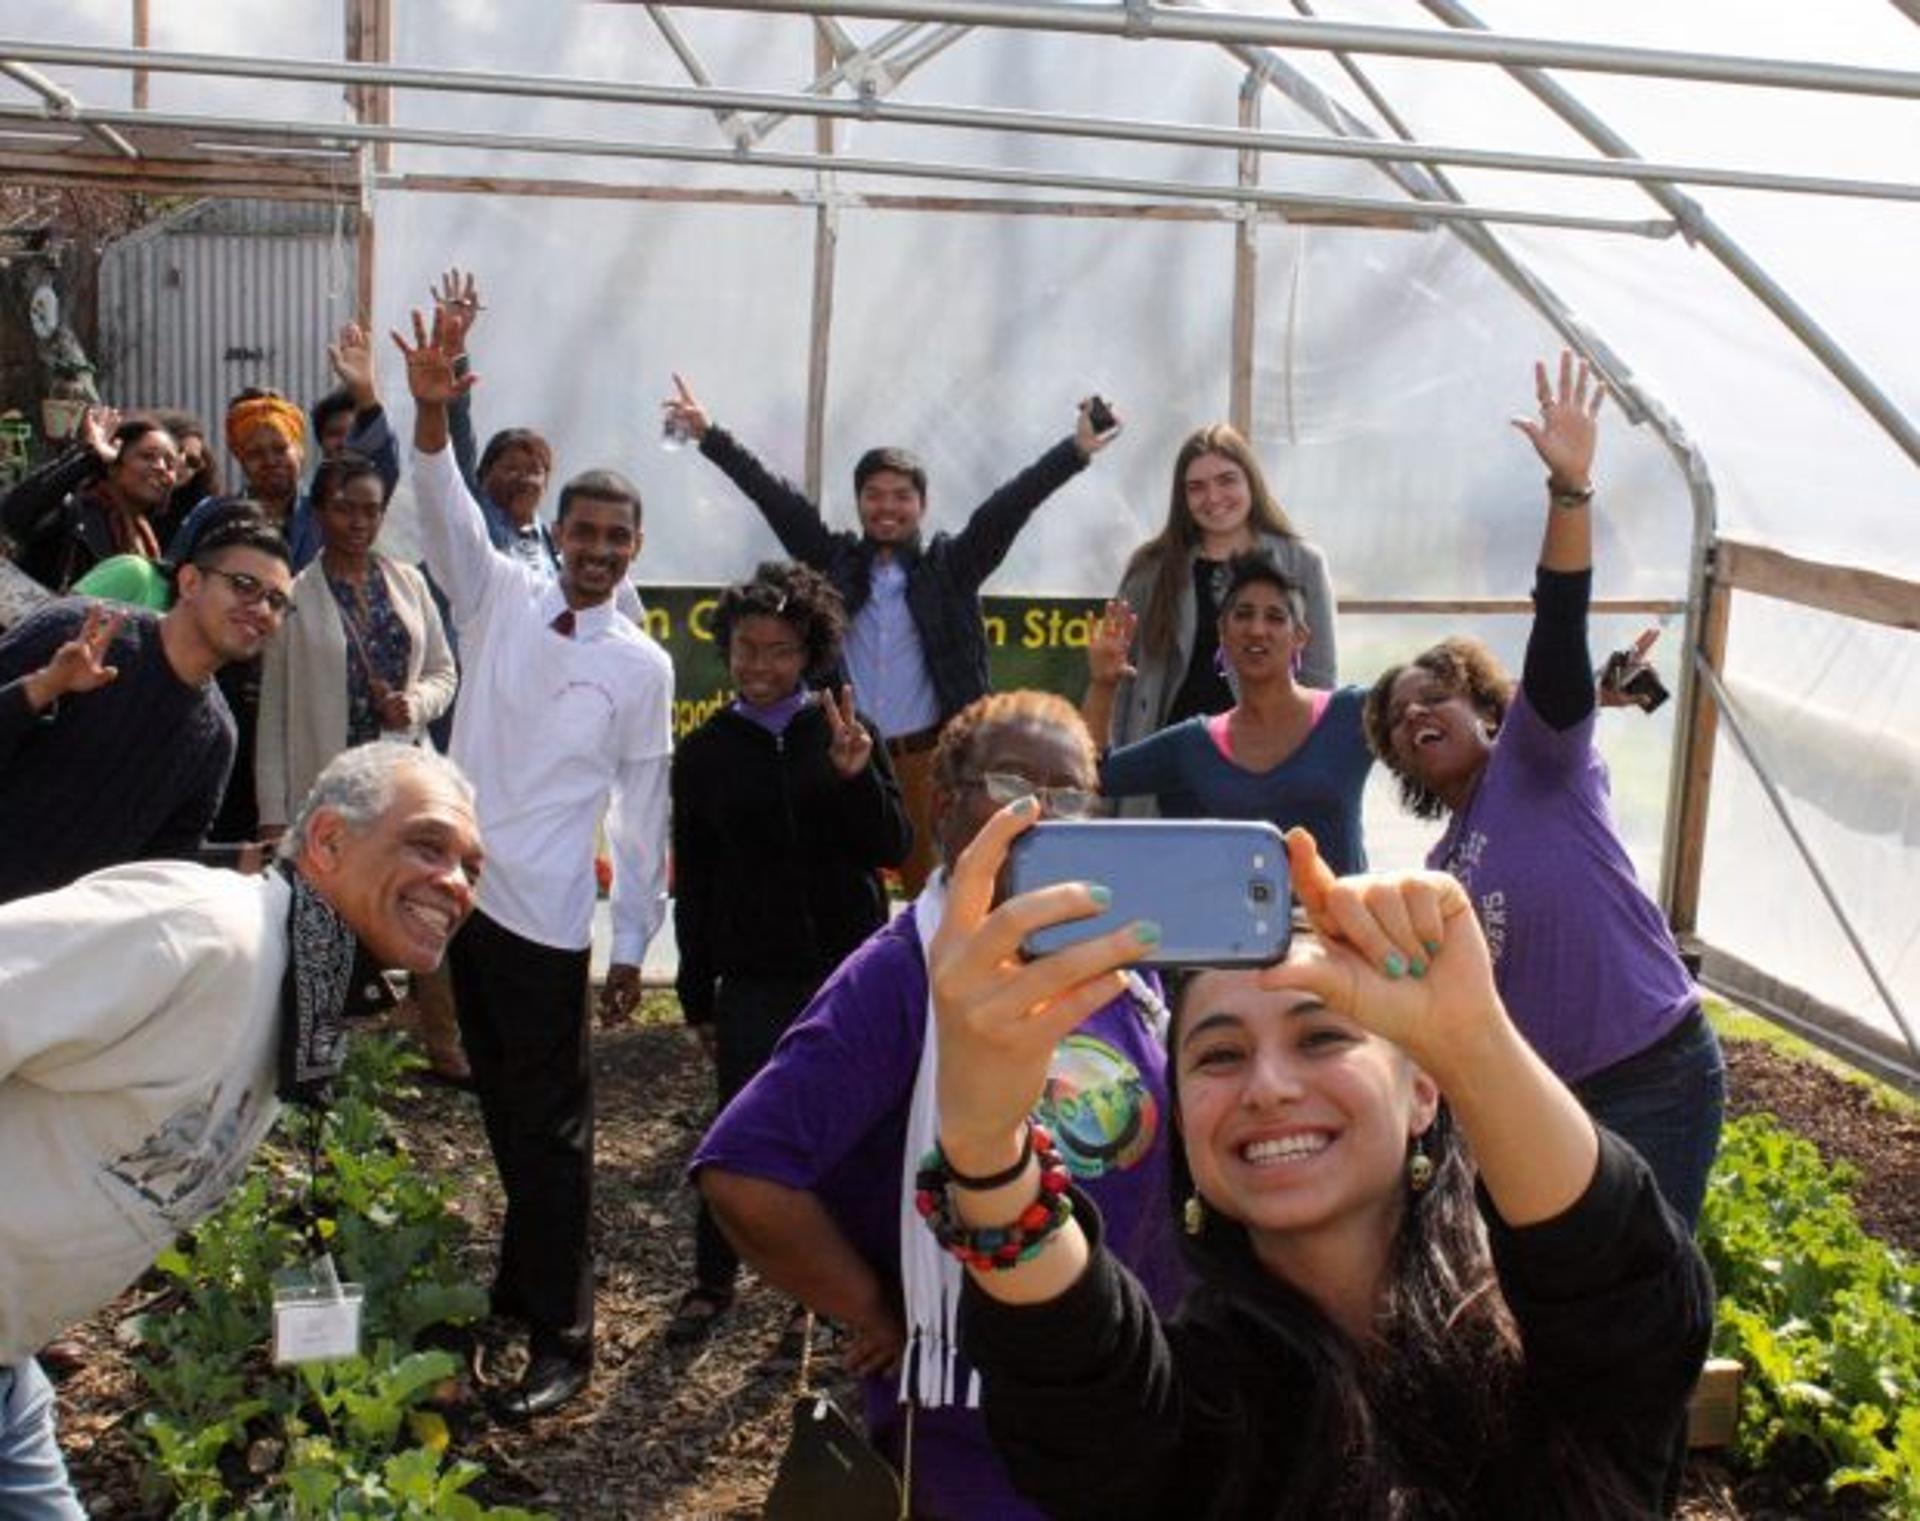 People stand in a greenhouse taking a fun selfie.